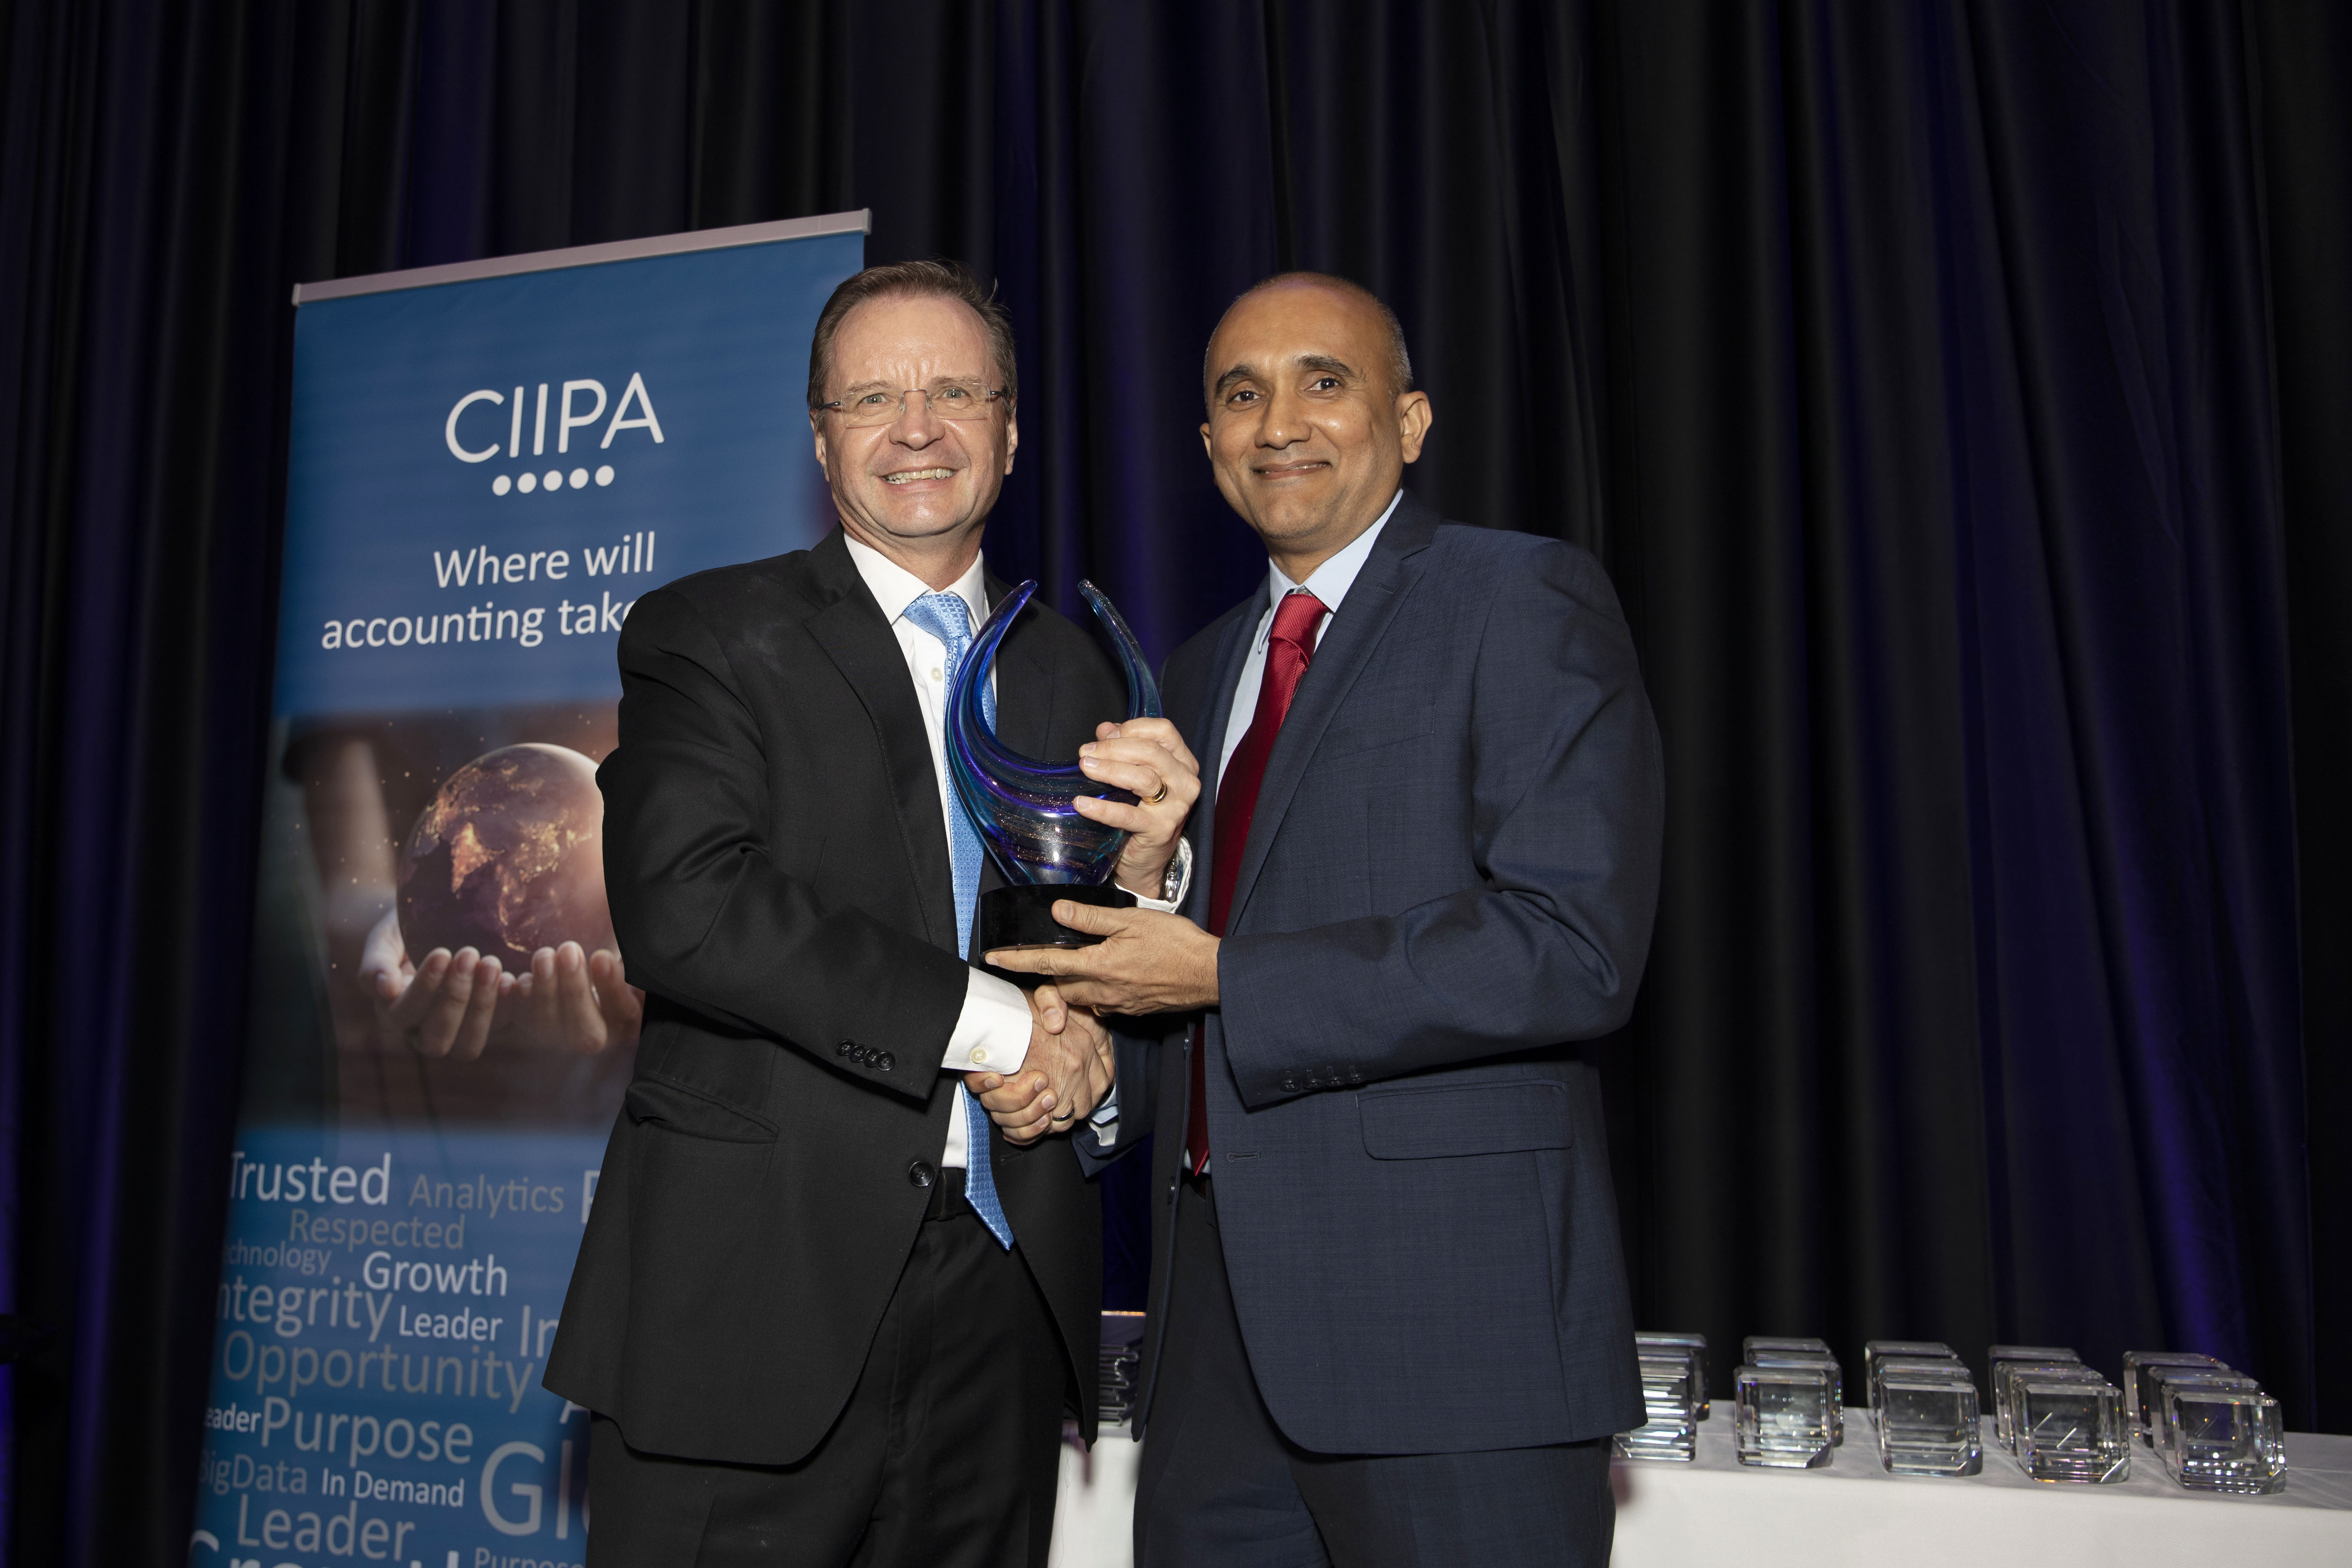 CIIPA President Rennie Khan, right, hands the Pioneer Award to recipient Charles Bolland during the 14th-annual CIIPA Awards Gala Saturday night (24 Sept.) at the Kimpton Seafire Resort and Spa.